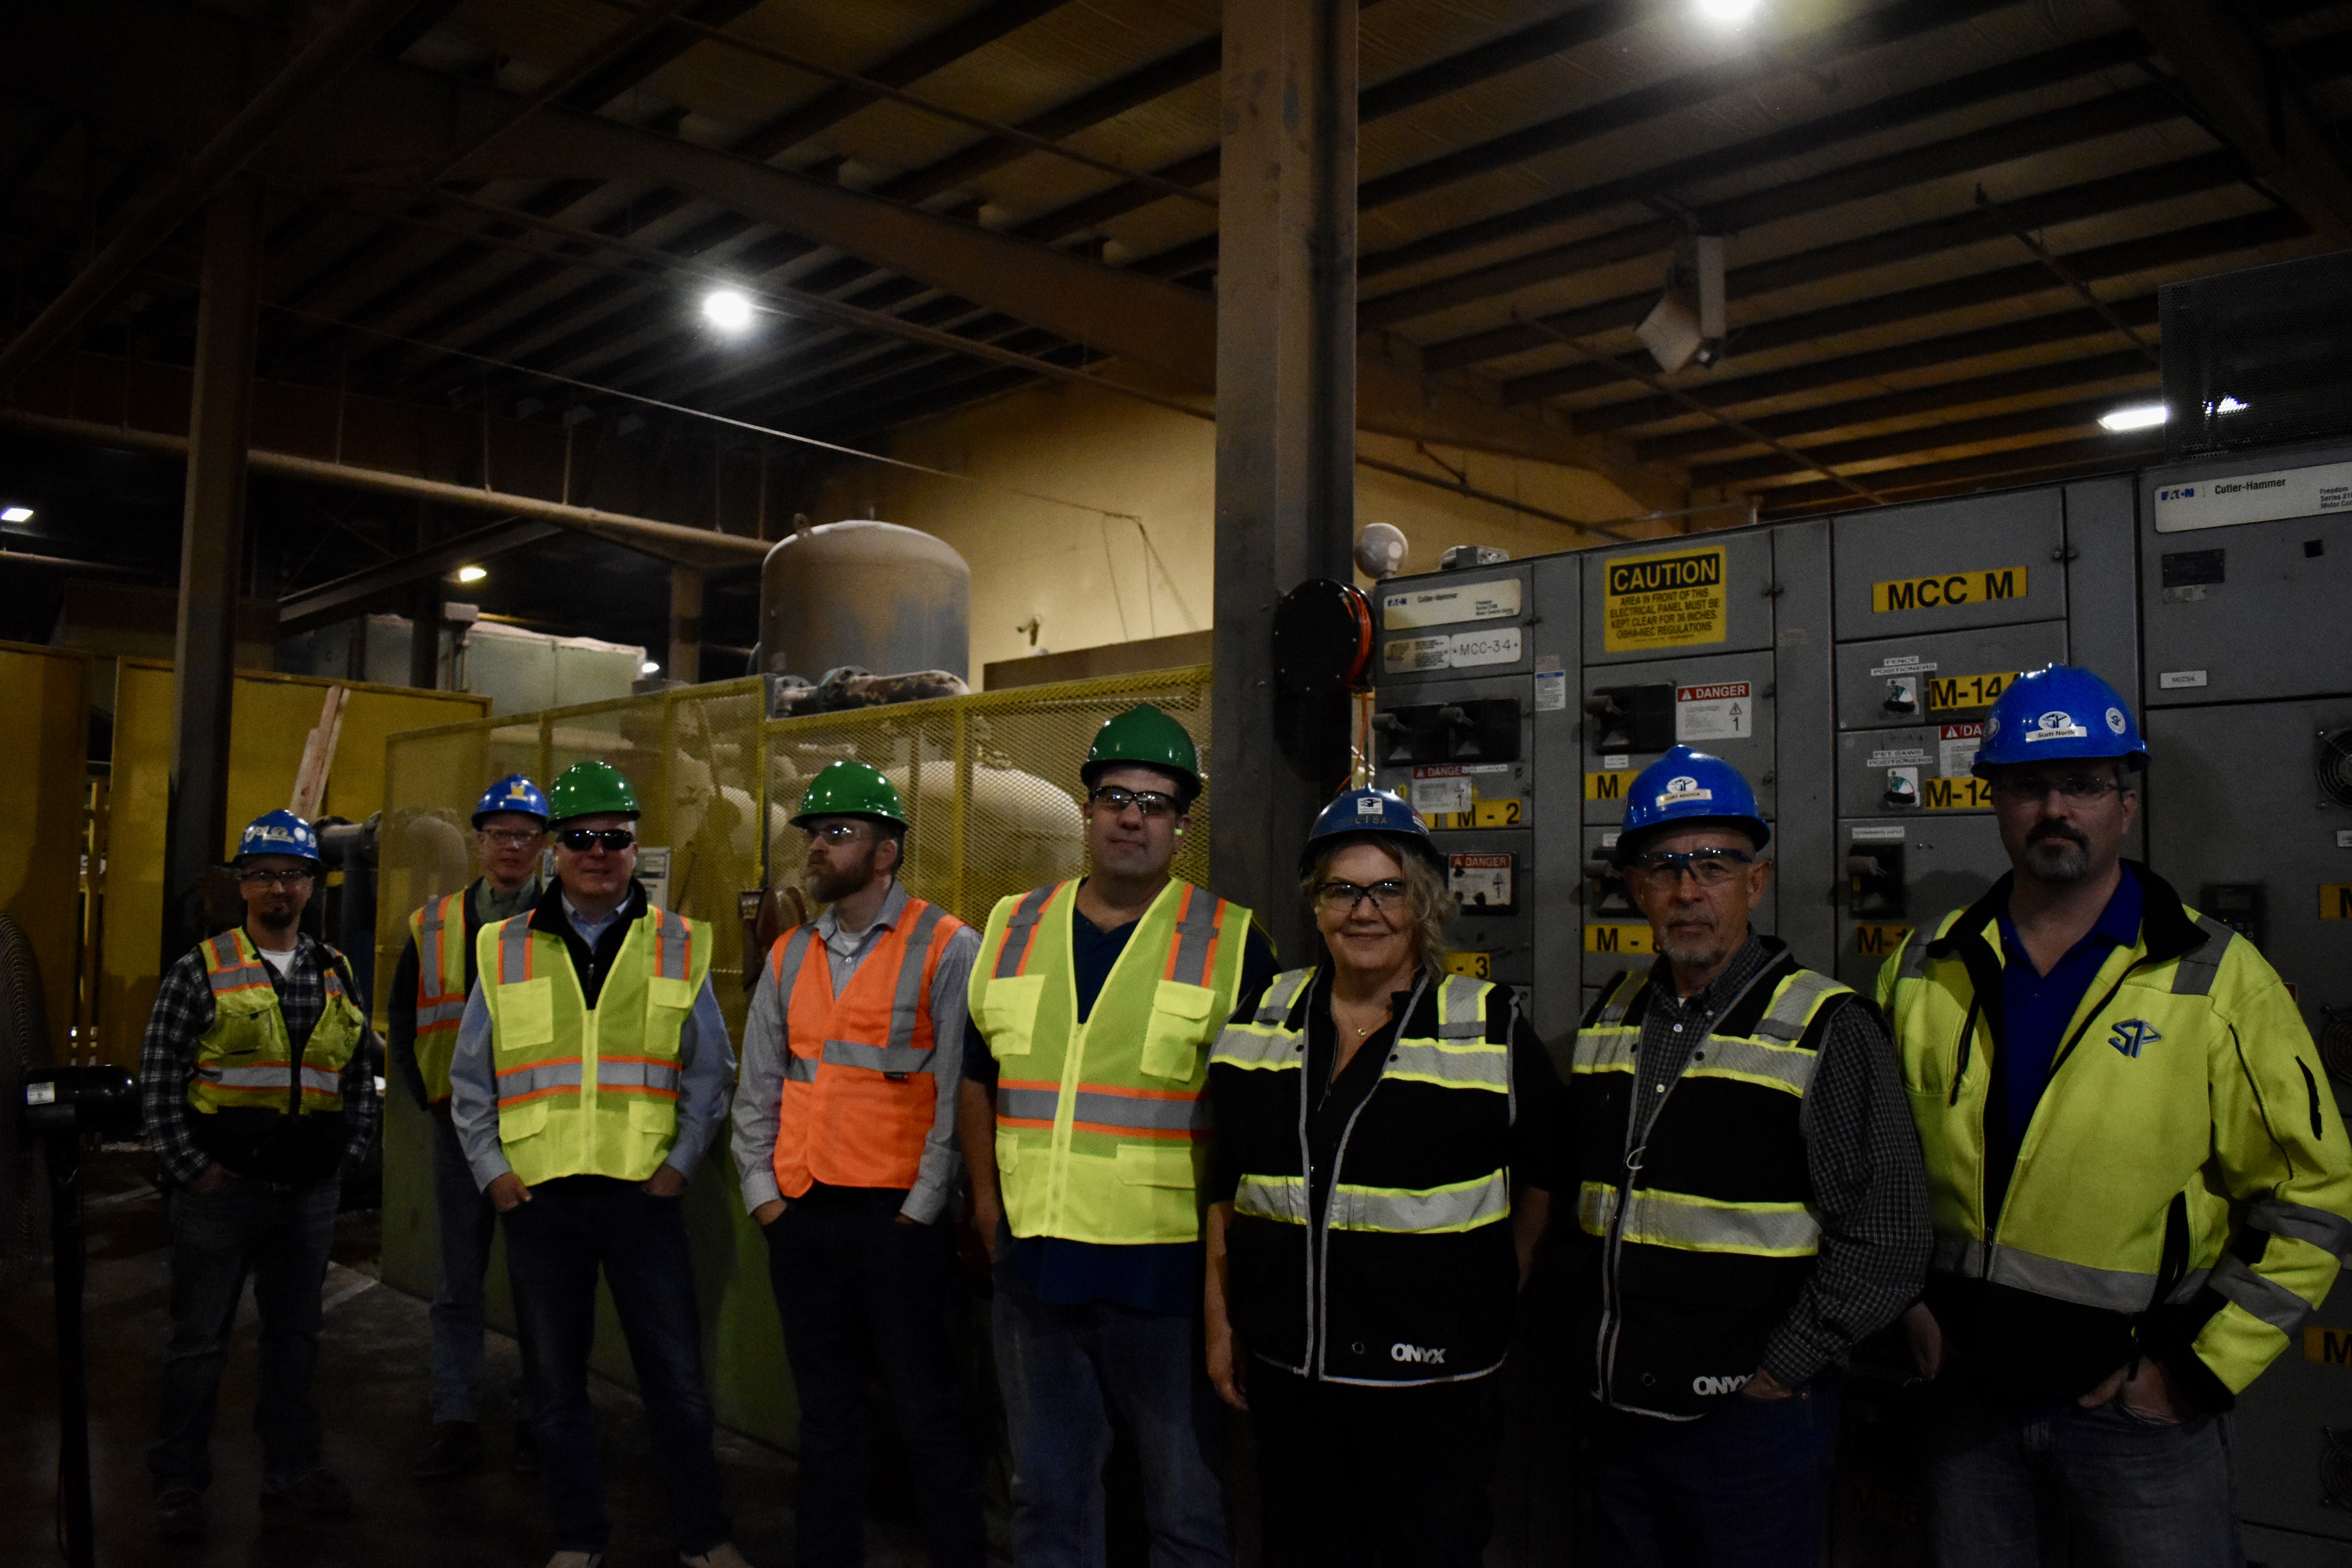 Employees of Sierra Pacific Industries in Centraila, Washington alongside representatives from the American Forest Resource Council at the mill, on April 7, 2022. Photo by Lauren Gallup.